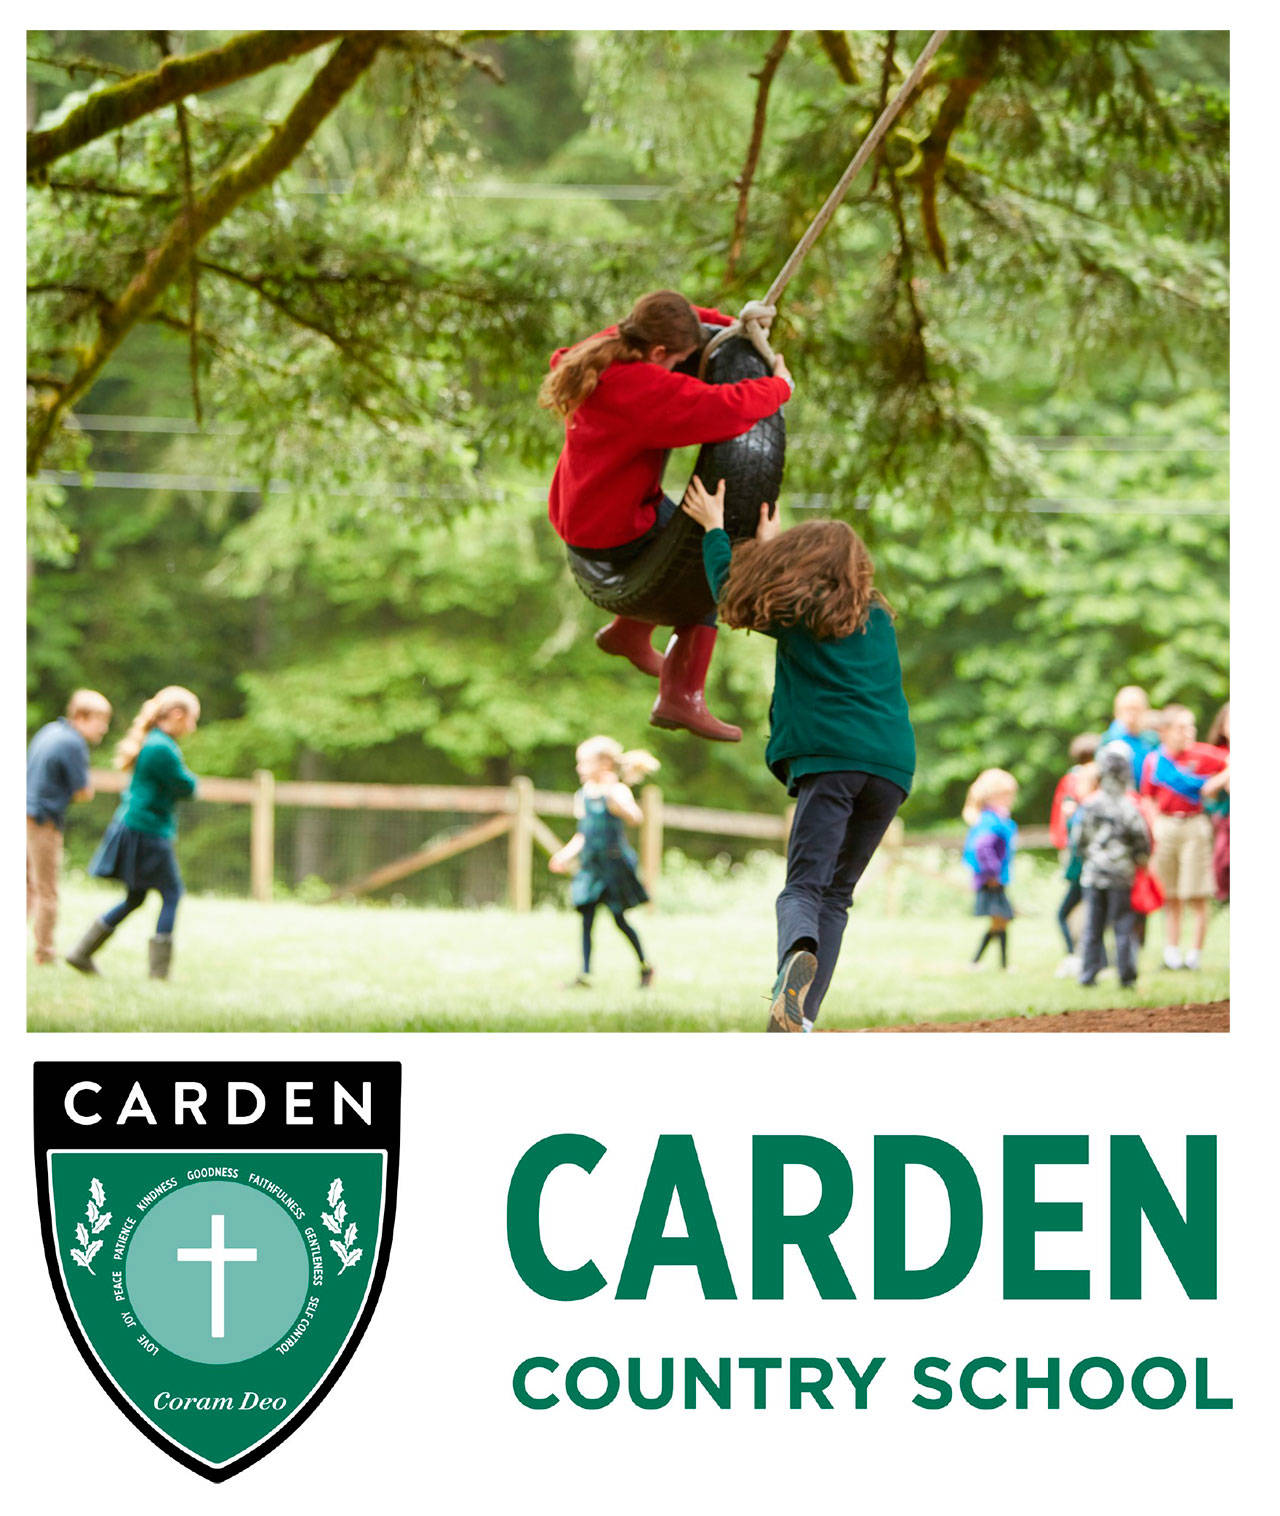 Meet the staff at Carden Country School open house